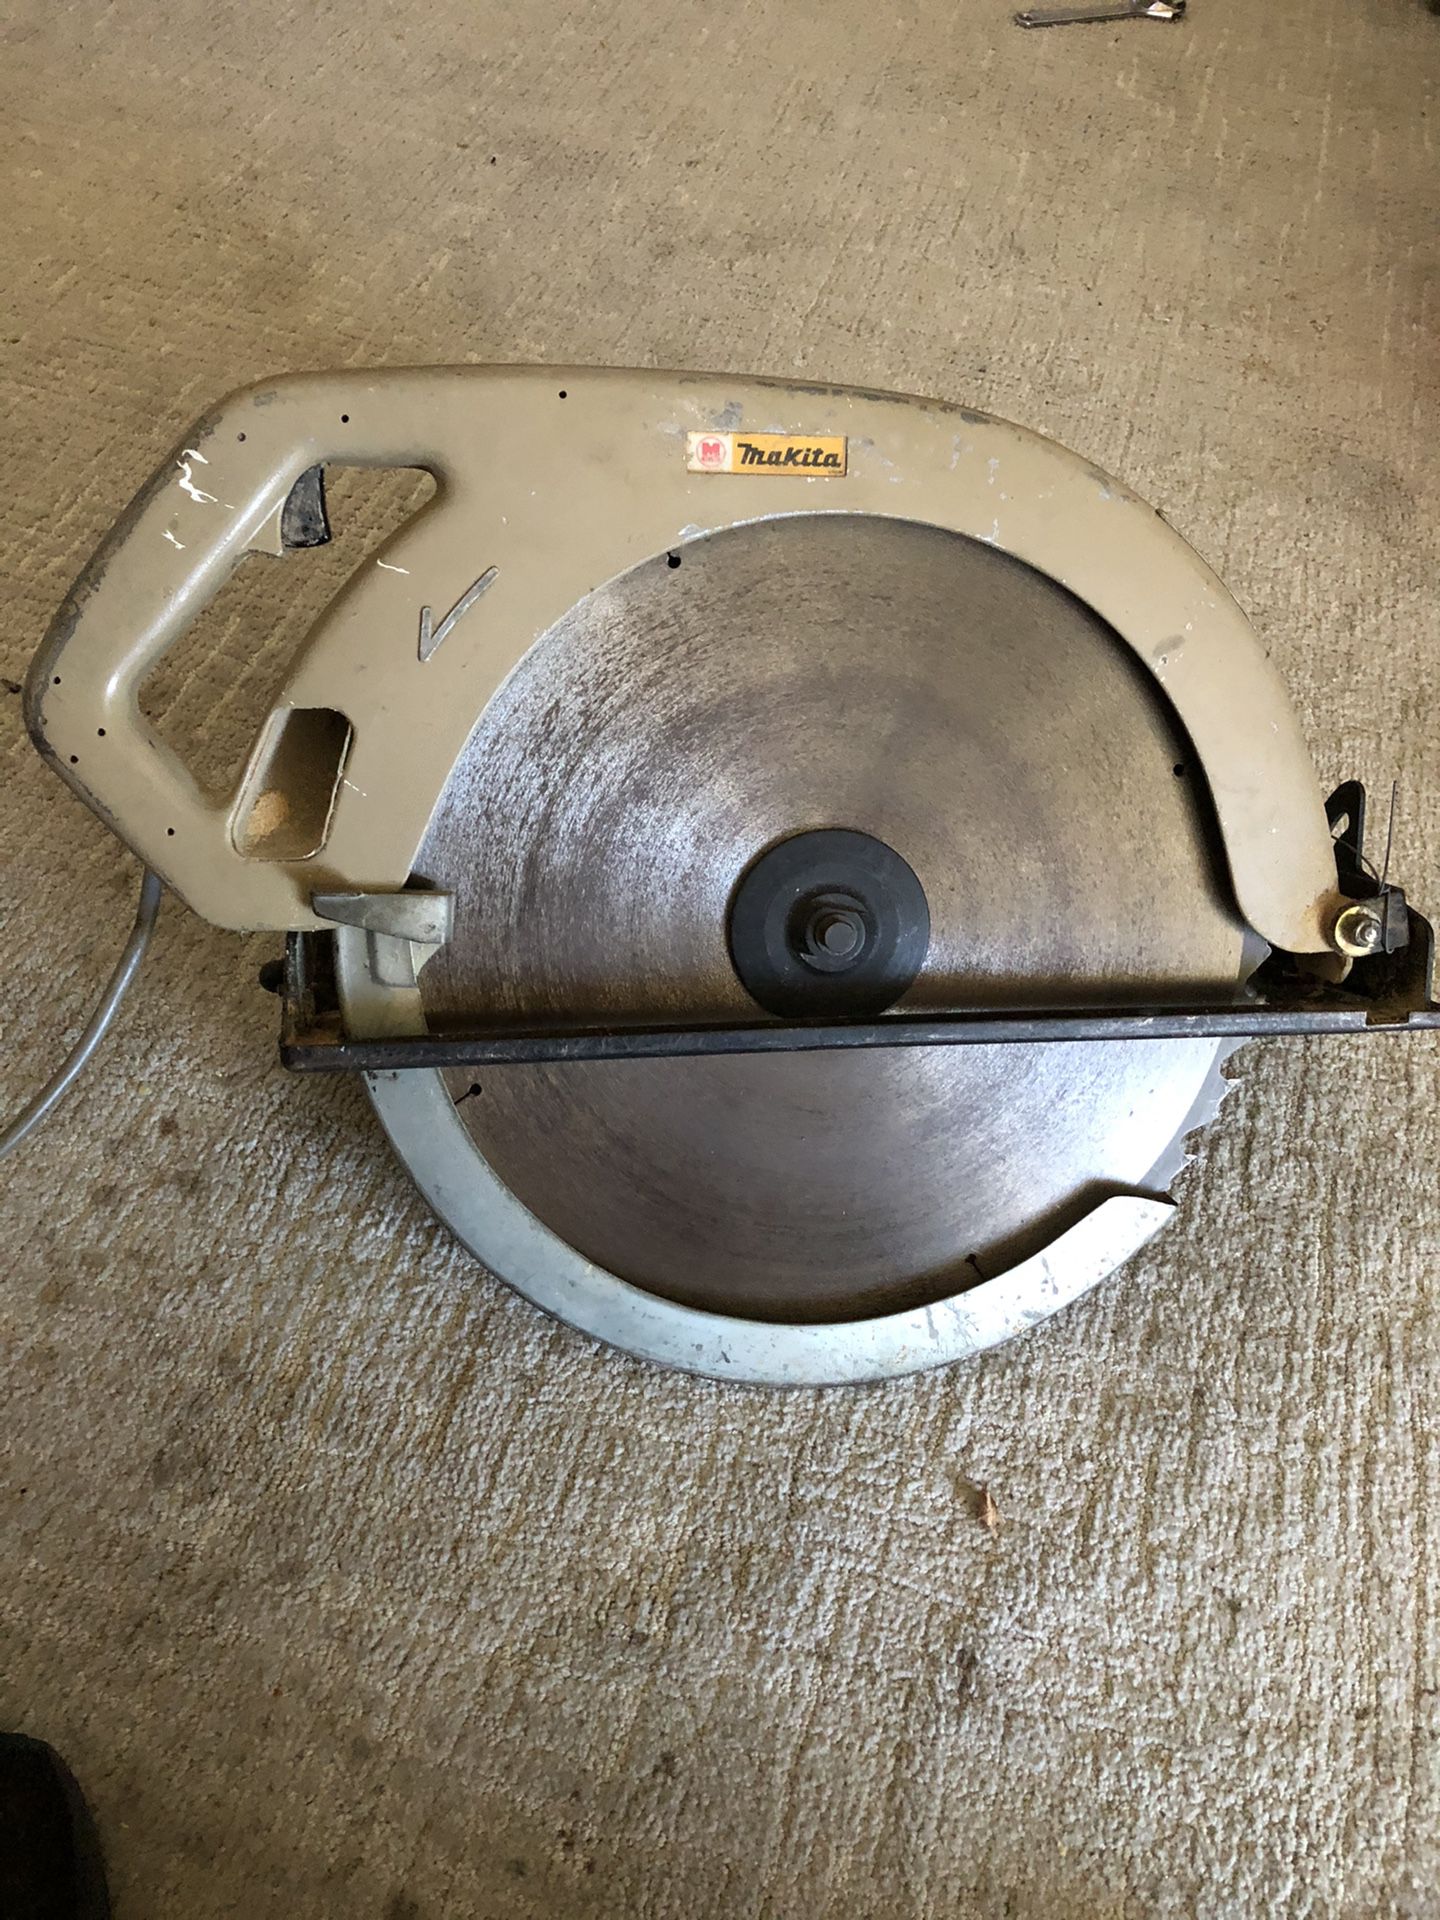 Makita 16-/12” beam saw in perfect working condition